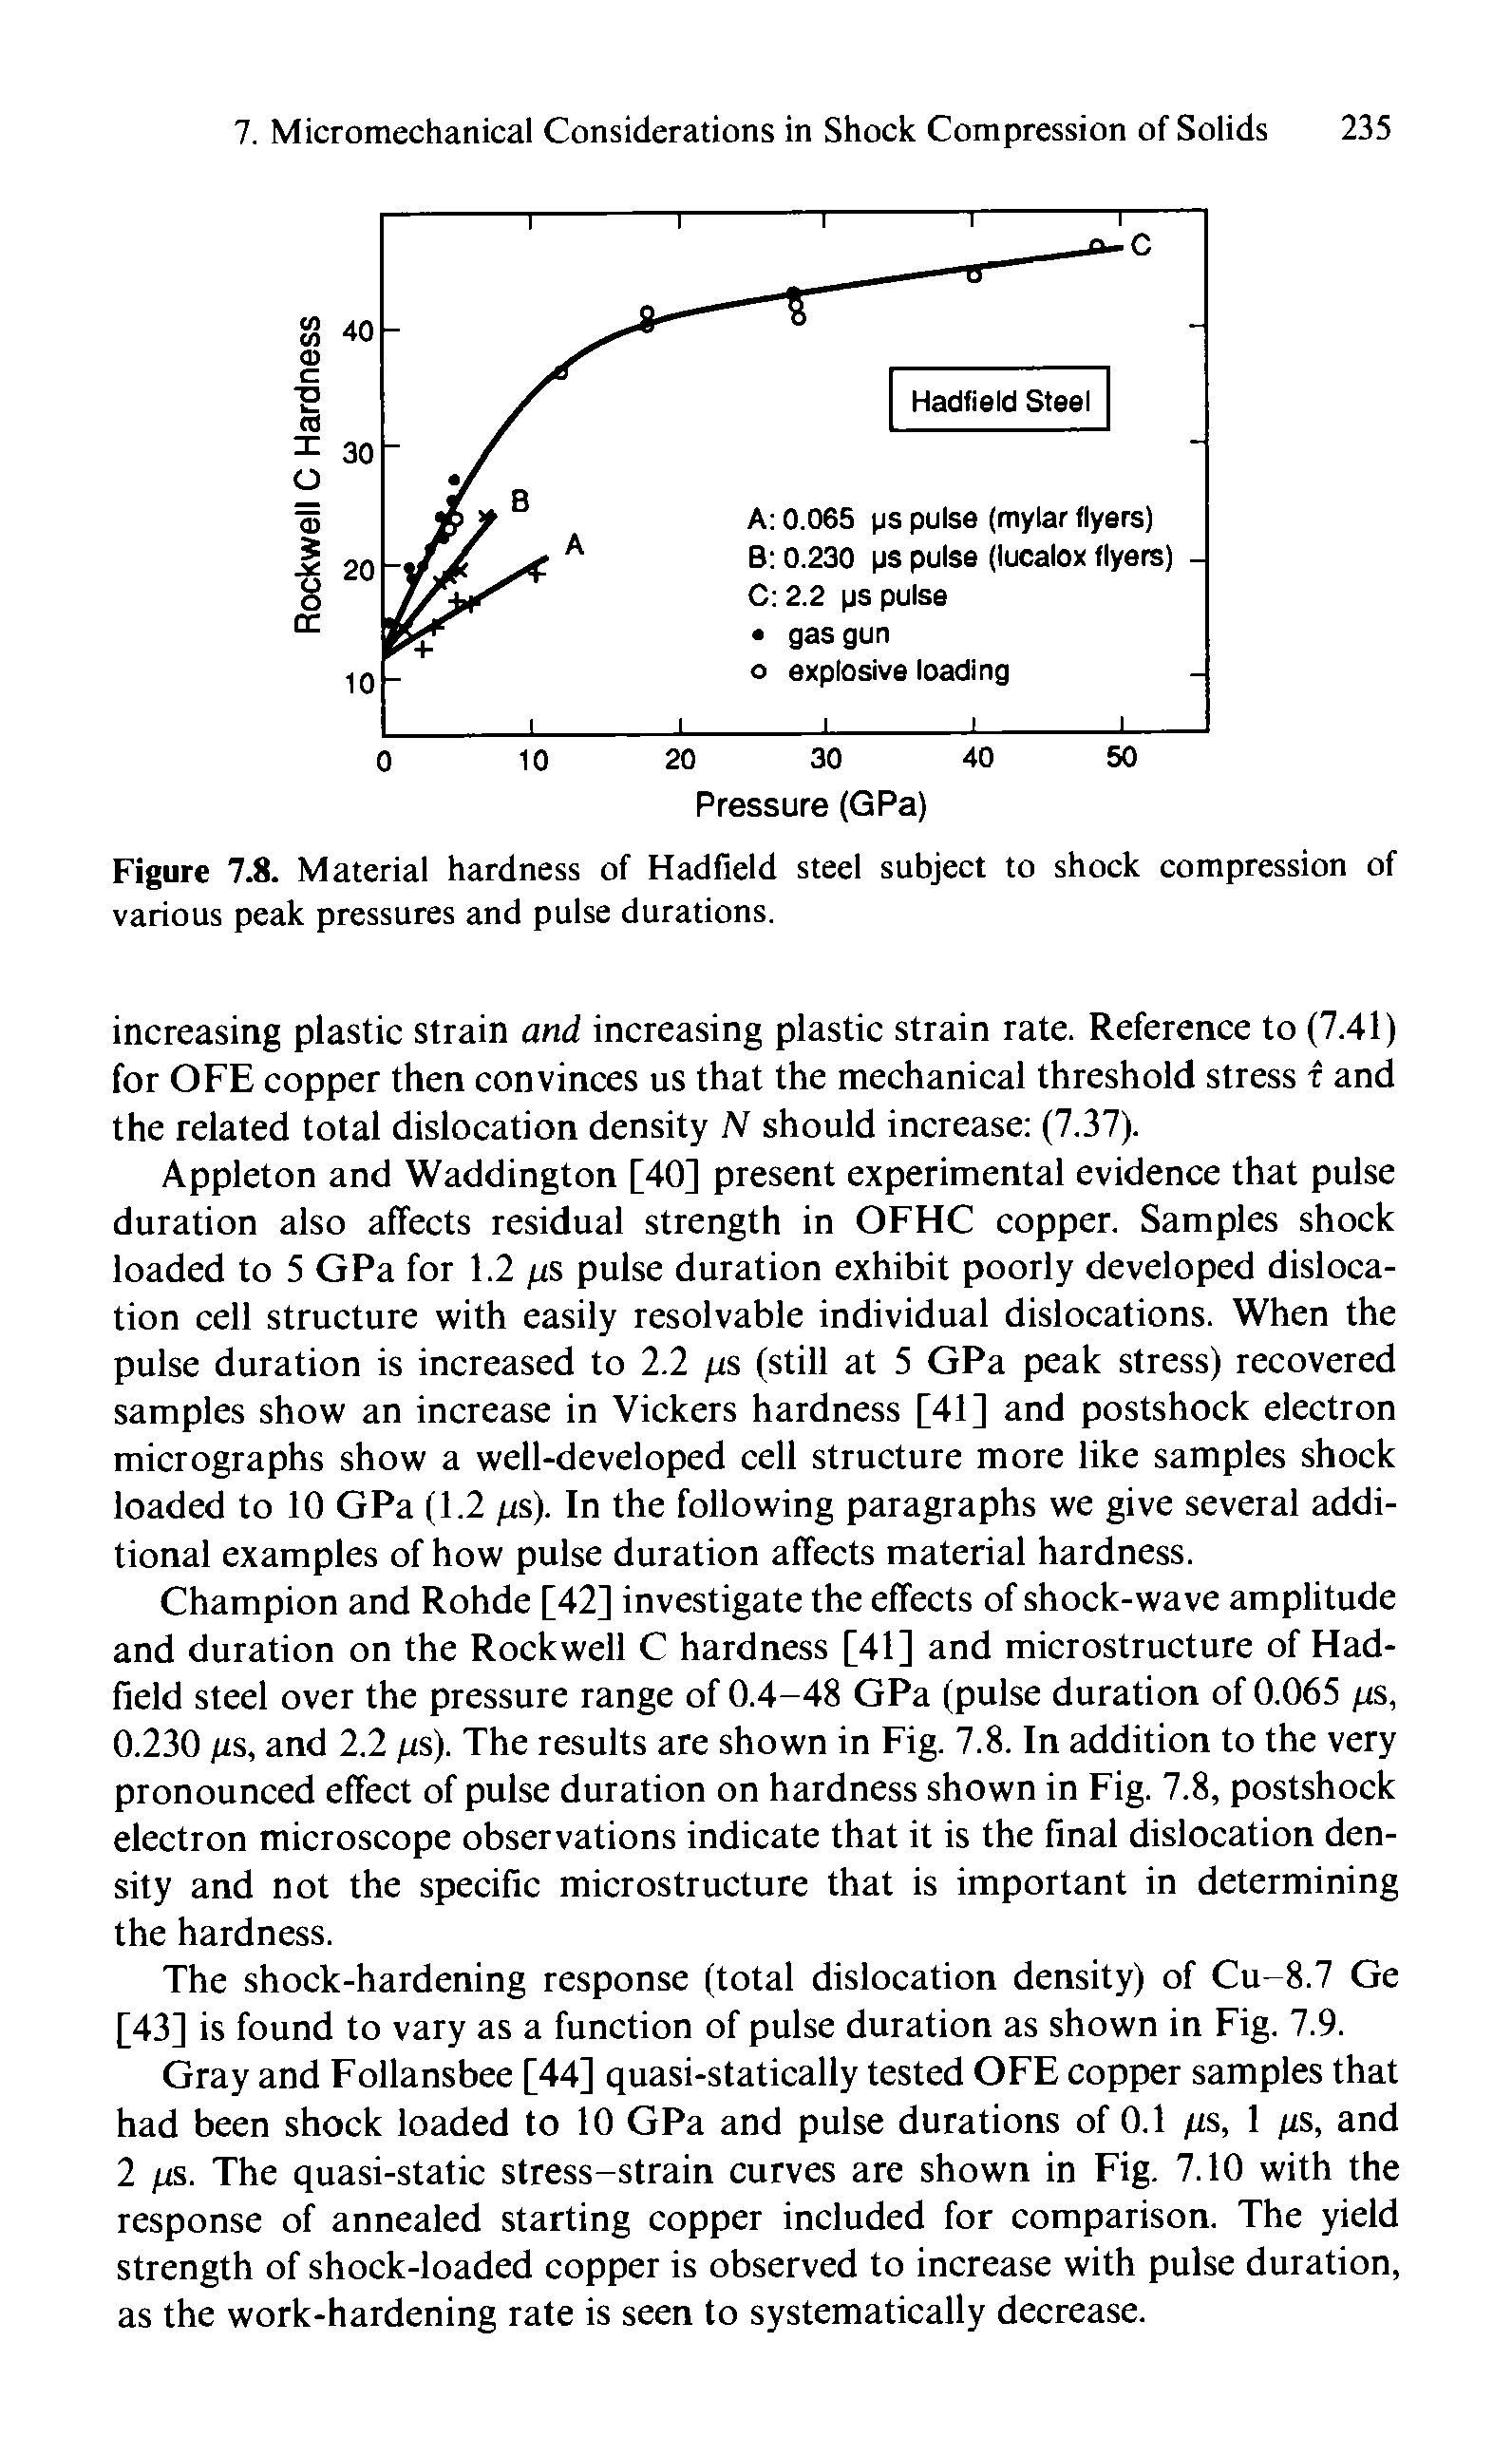 Figure 7.8. Material hardness of Hadfield steel subject to shock compression of various peak pressures and pulse durations.